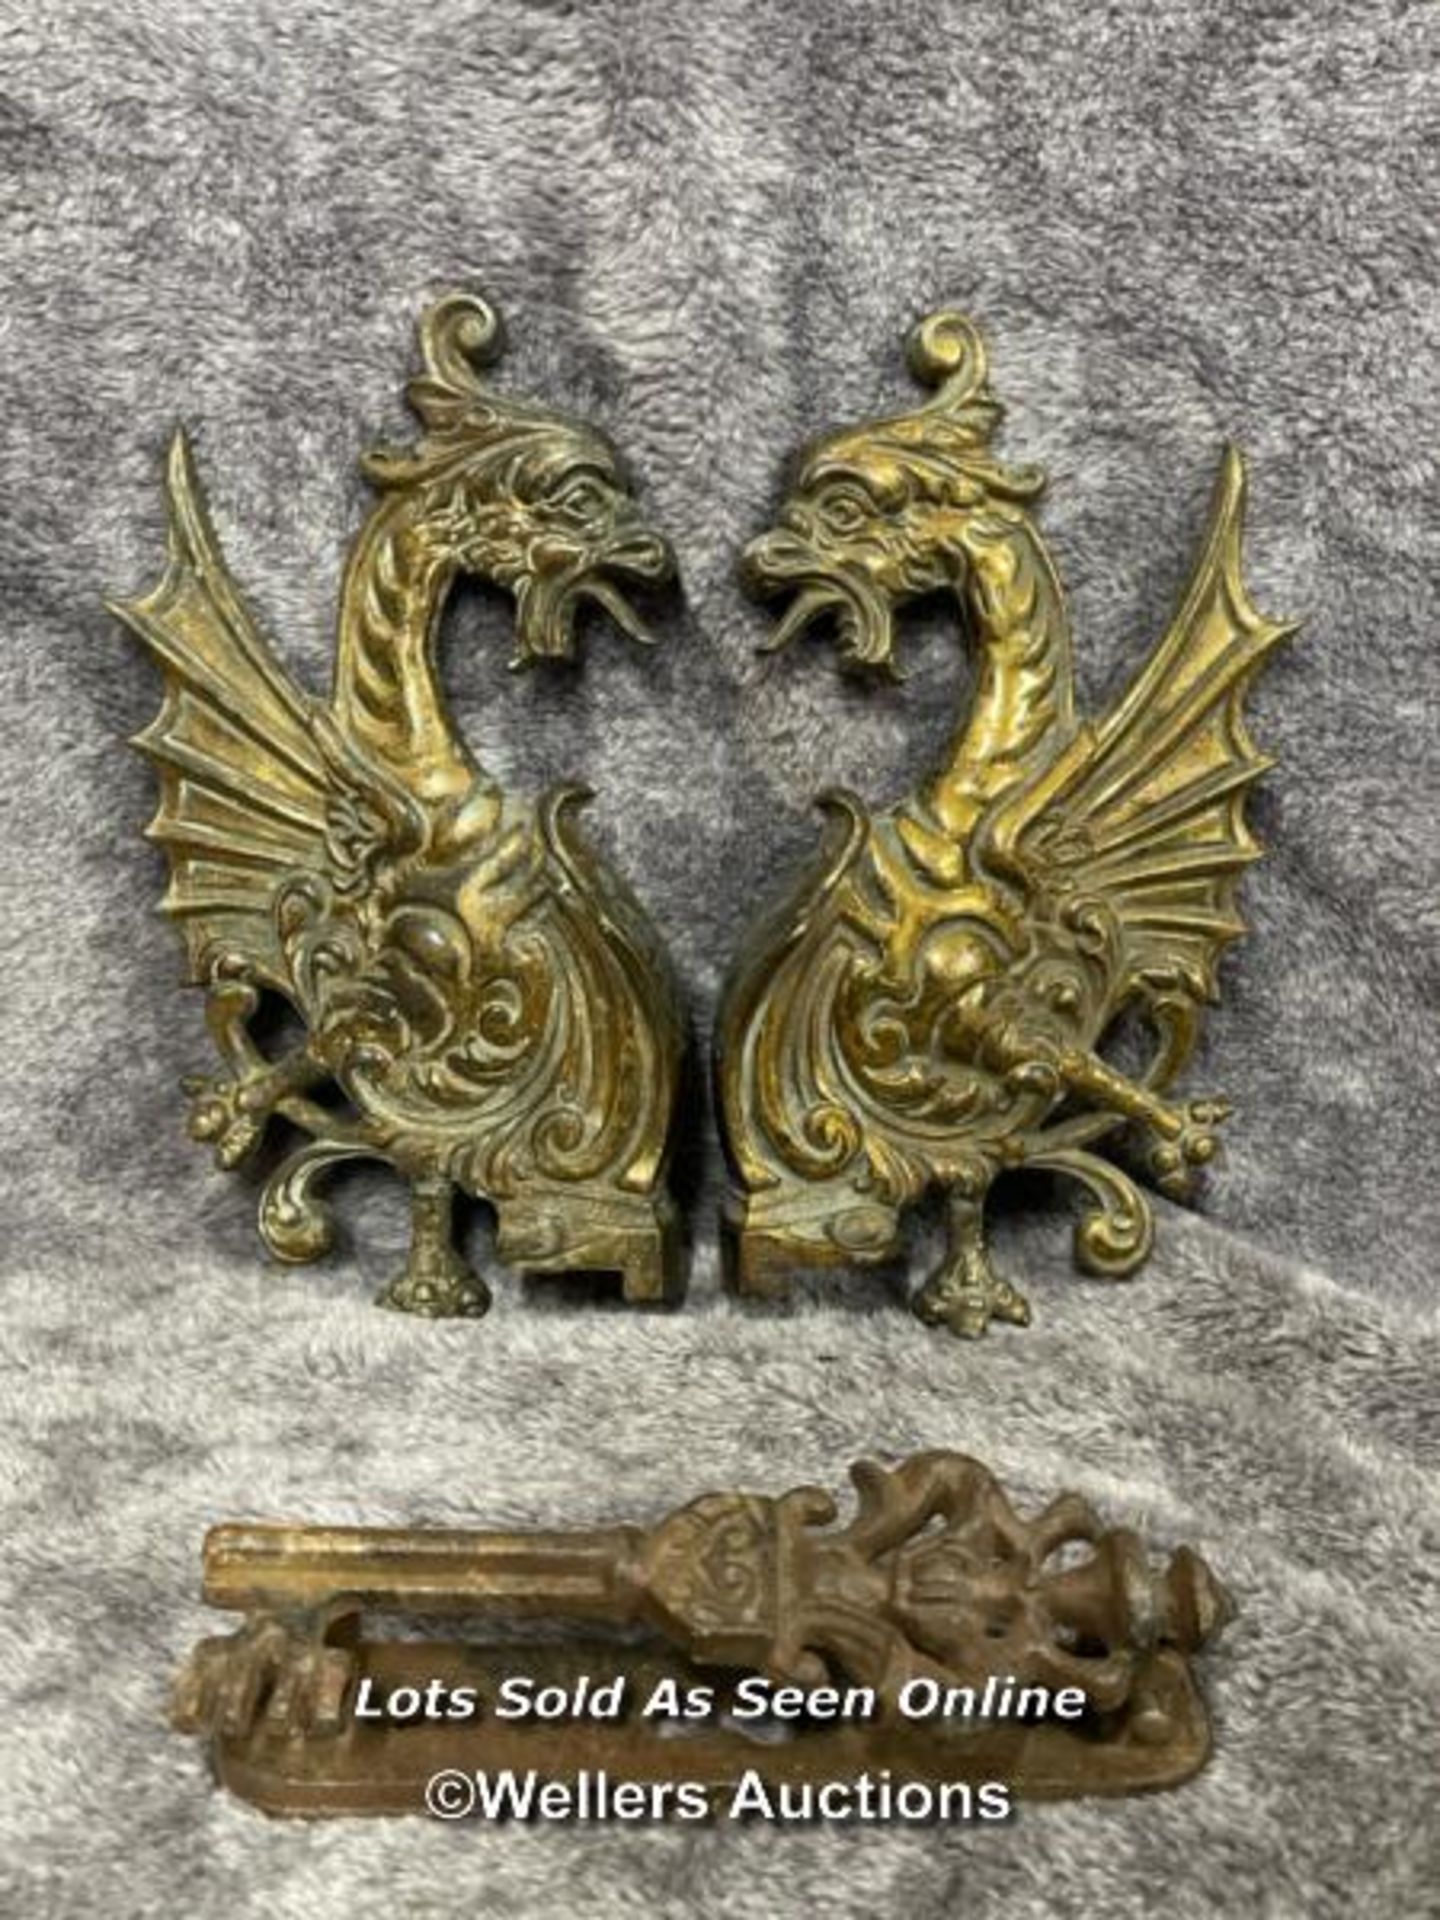 A pair of brass door fixtures in form of a dragon and one other iron door knocker, dragons 20cm high